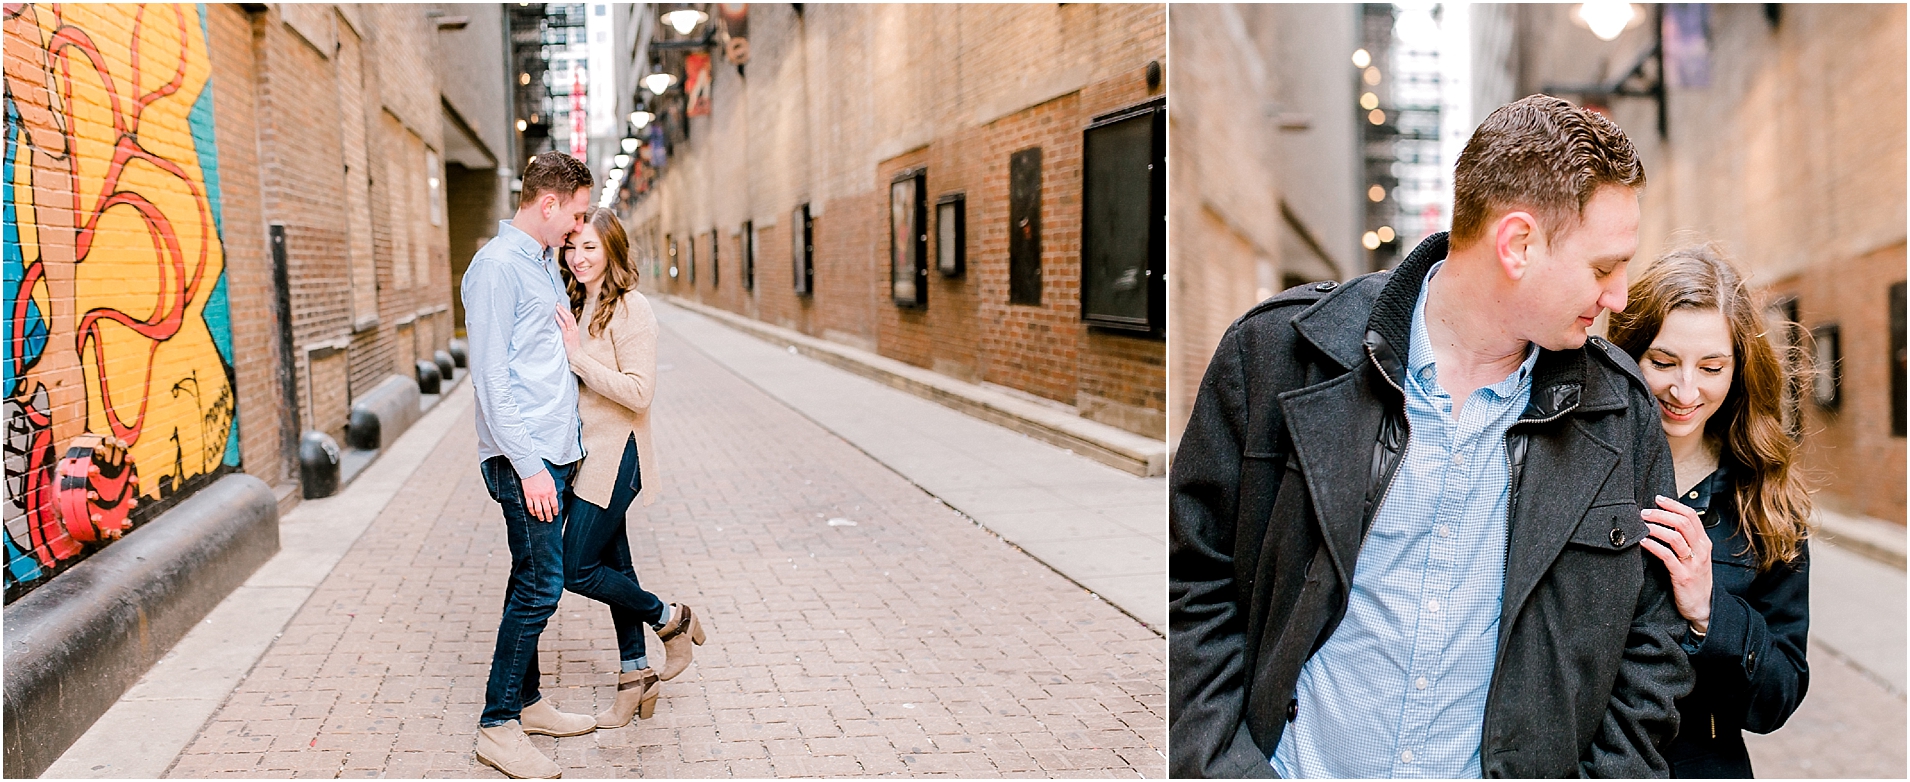 Chicago Aisle engagement session with grafitti